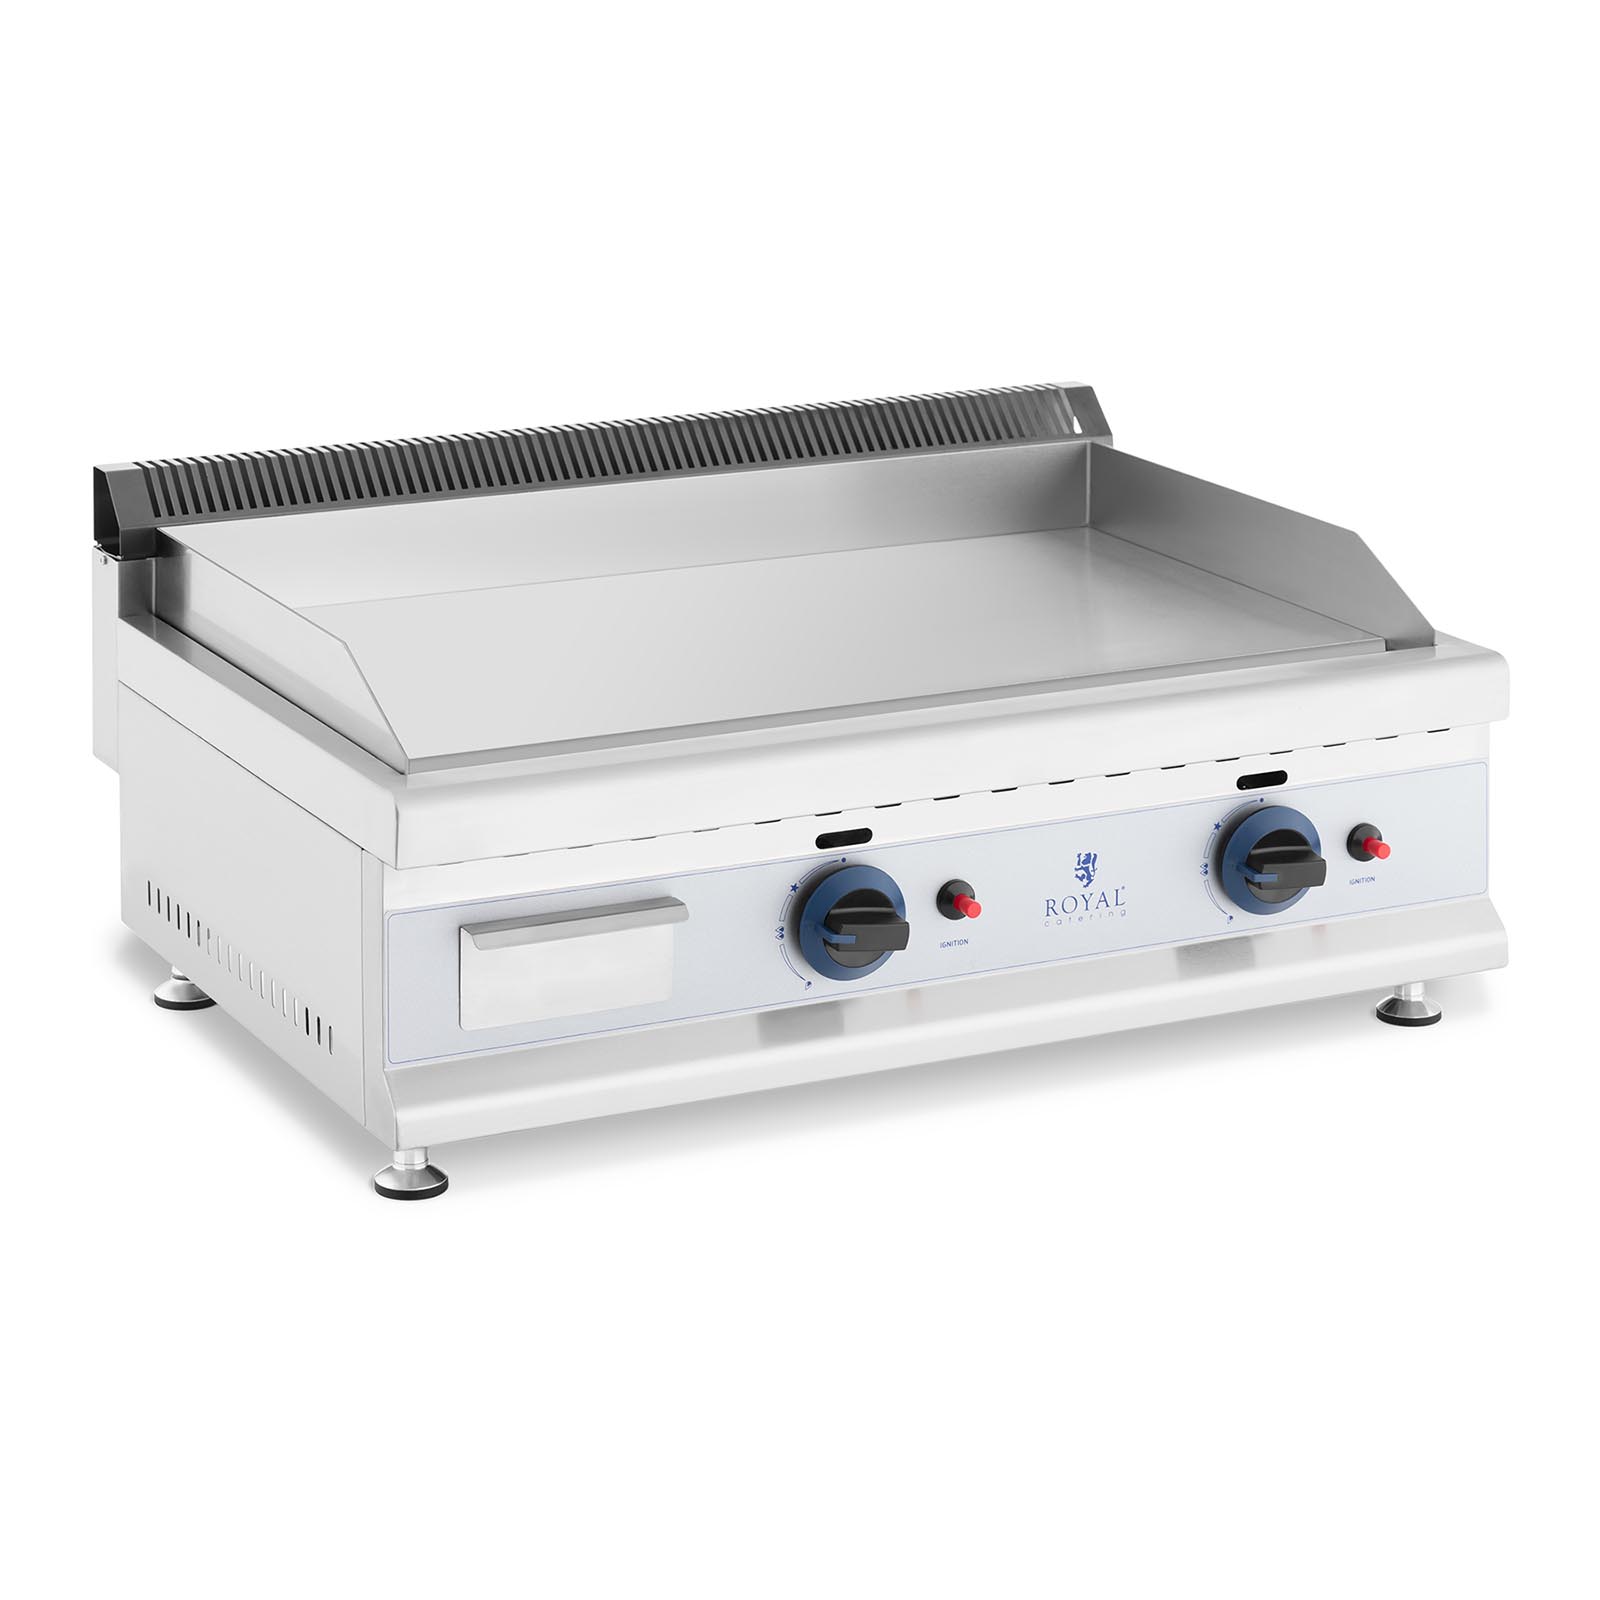 Factory second Gas Griddle - 74.5 x 40 cm - smooth - 2 x 3,100 W - Natural gas - 20 mbar